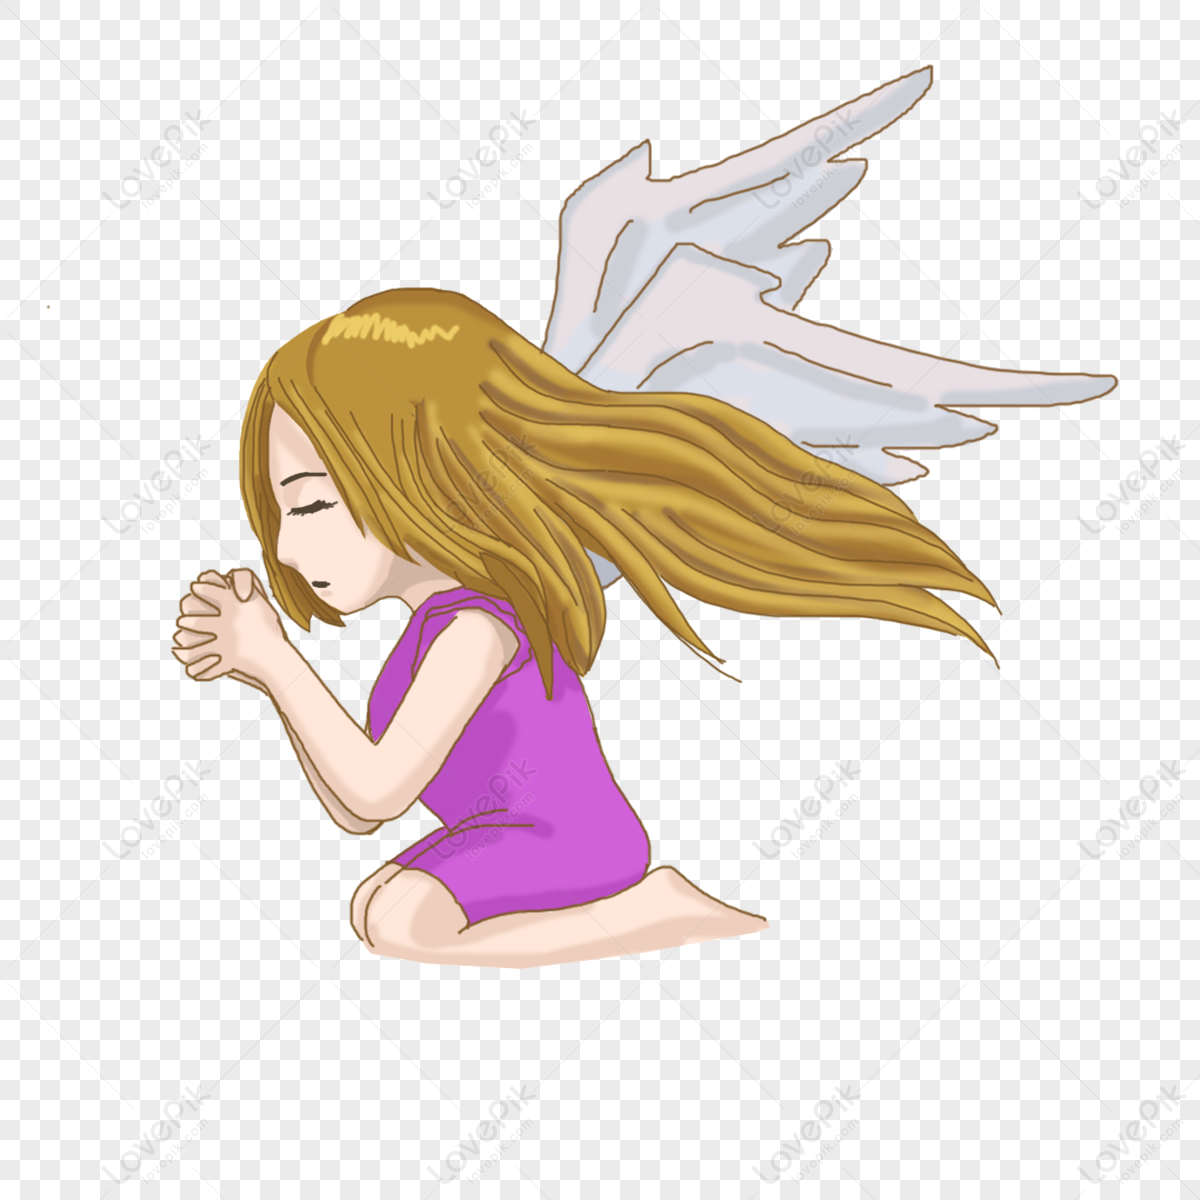 A Girl With Wings PNG Transparent Image And Clipart Image For Free Download  - Lovepik | 400173557